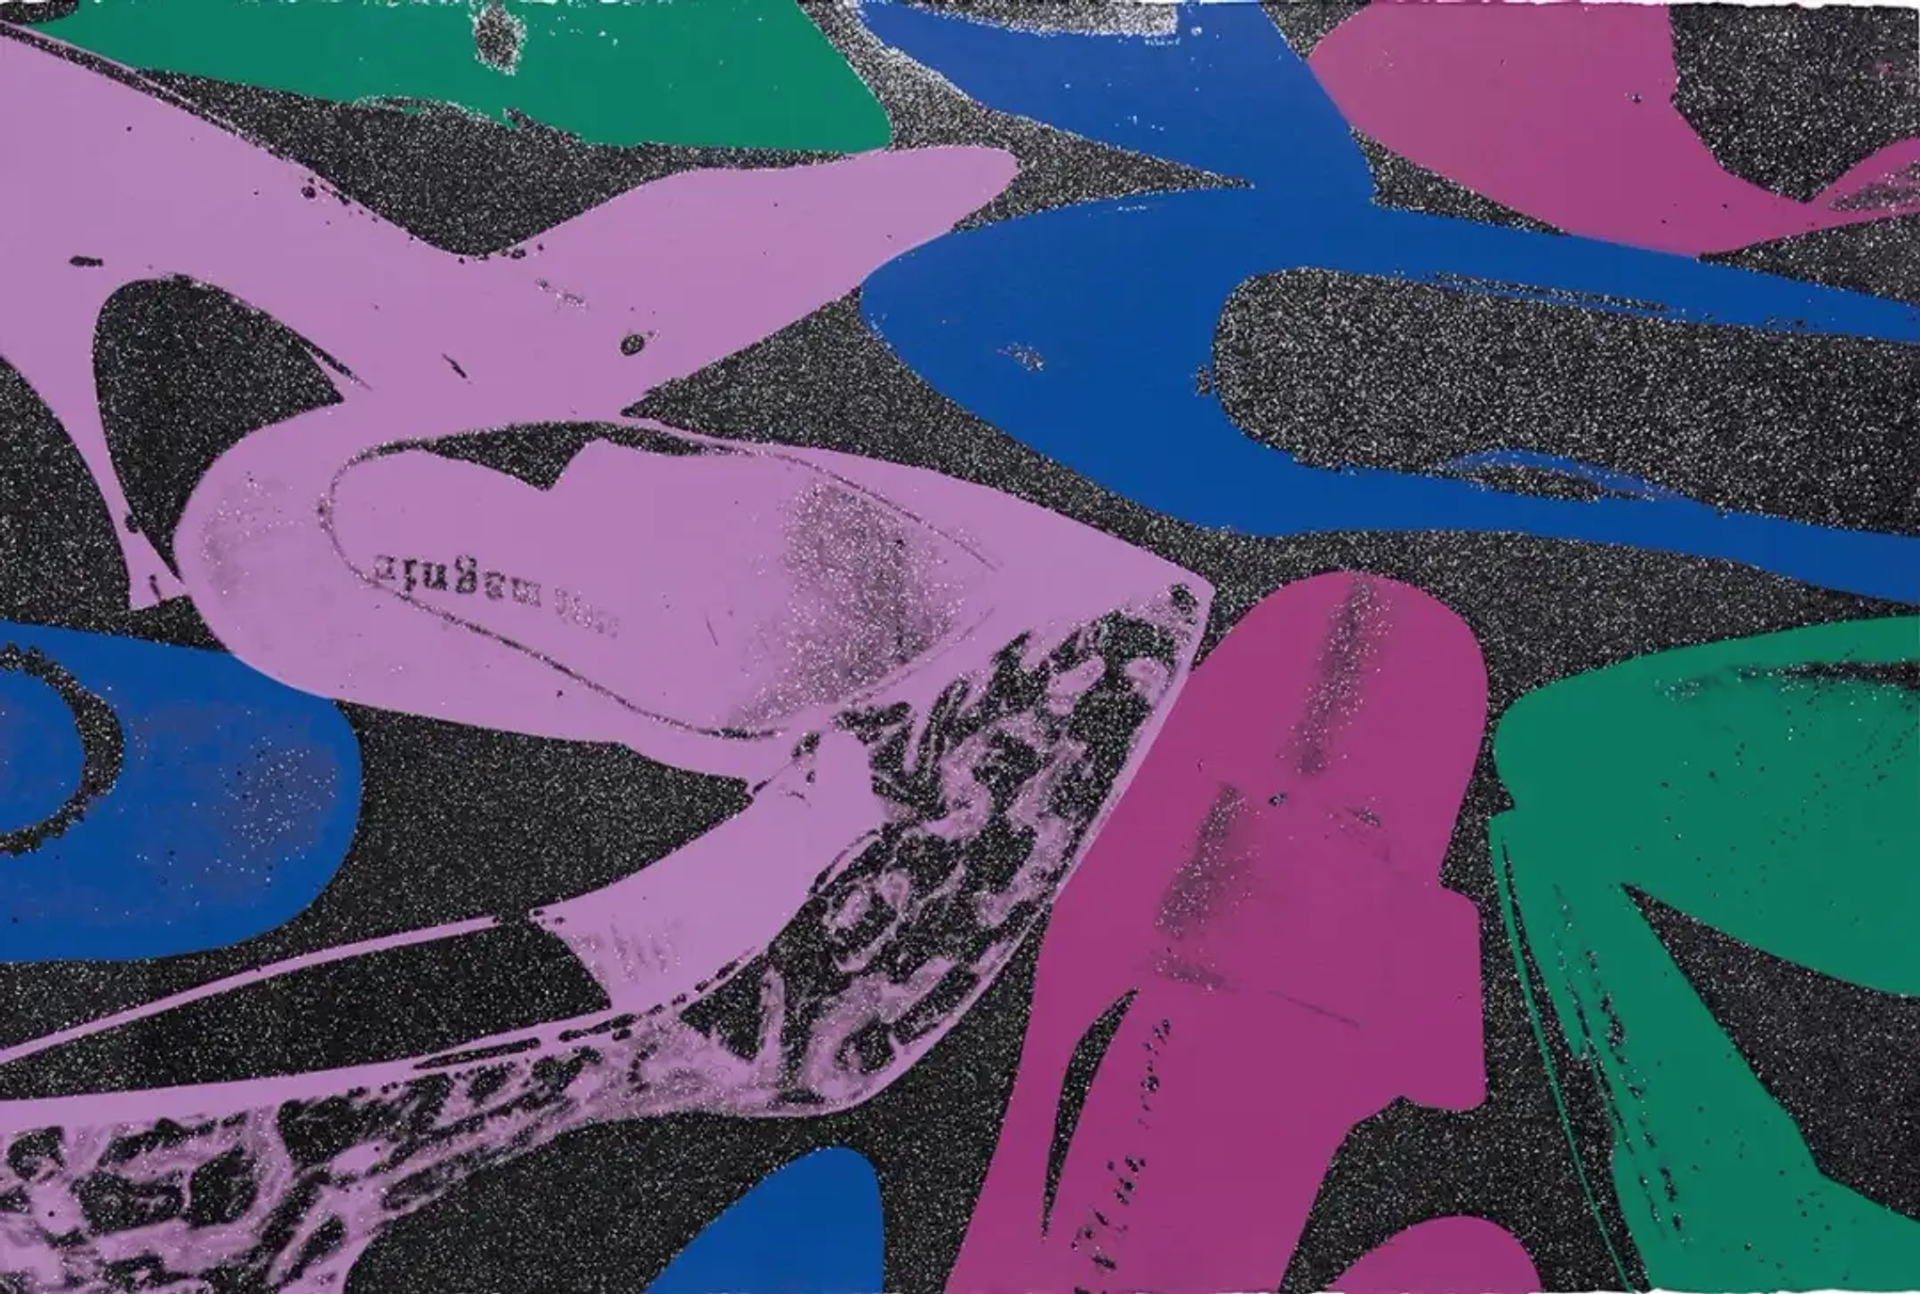 The print depicts a haphazard arrangement of high heel shoes that appear to have been strewn carelessly on the floor. The shoes are rendered in bright and bold colours with pink, green, blue and fuchsia dominating the composition. The vibrant colours stand out against the dark backdrop.